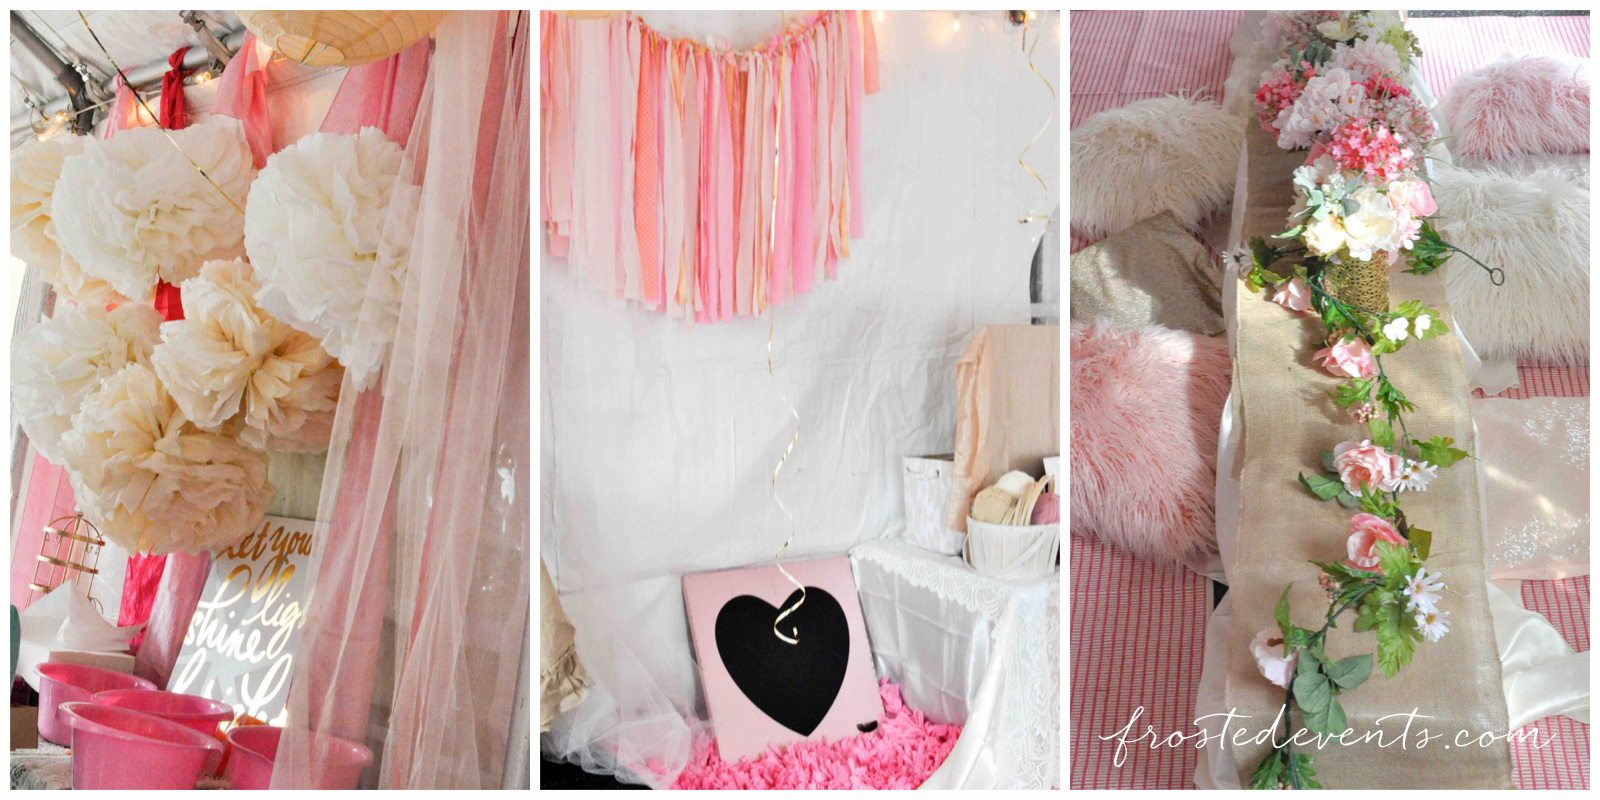 Bohemian Party Ideas for a Birthday, Bridal Shower or Baby Shower Boho Style 